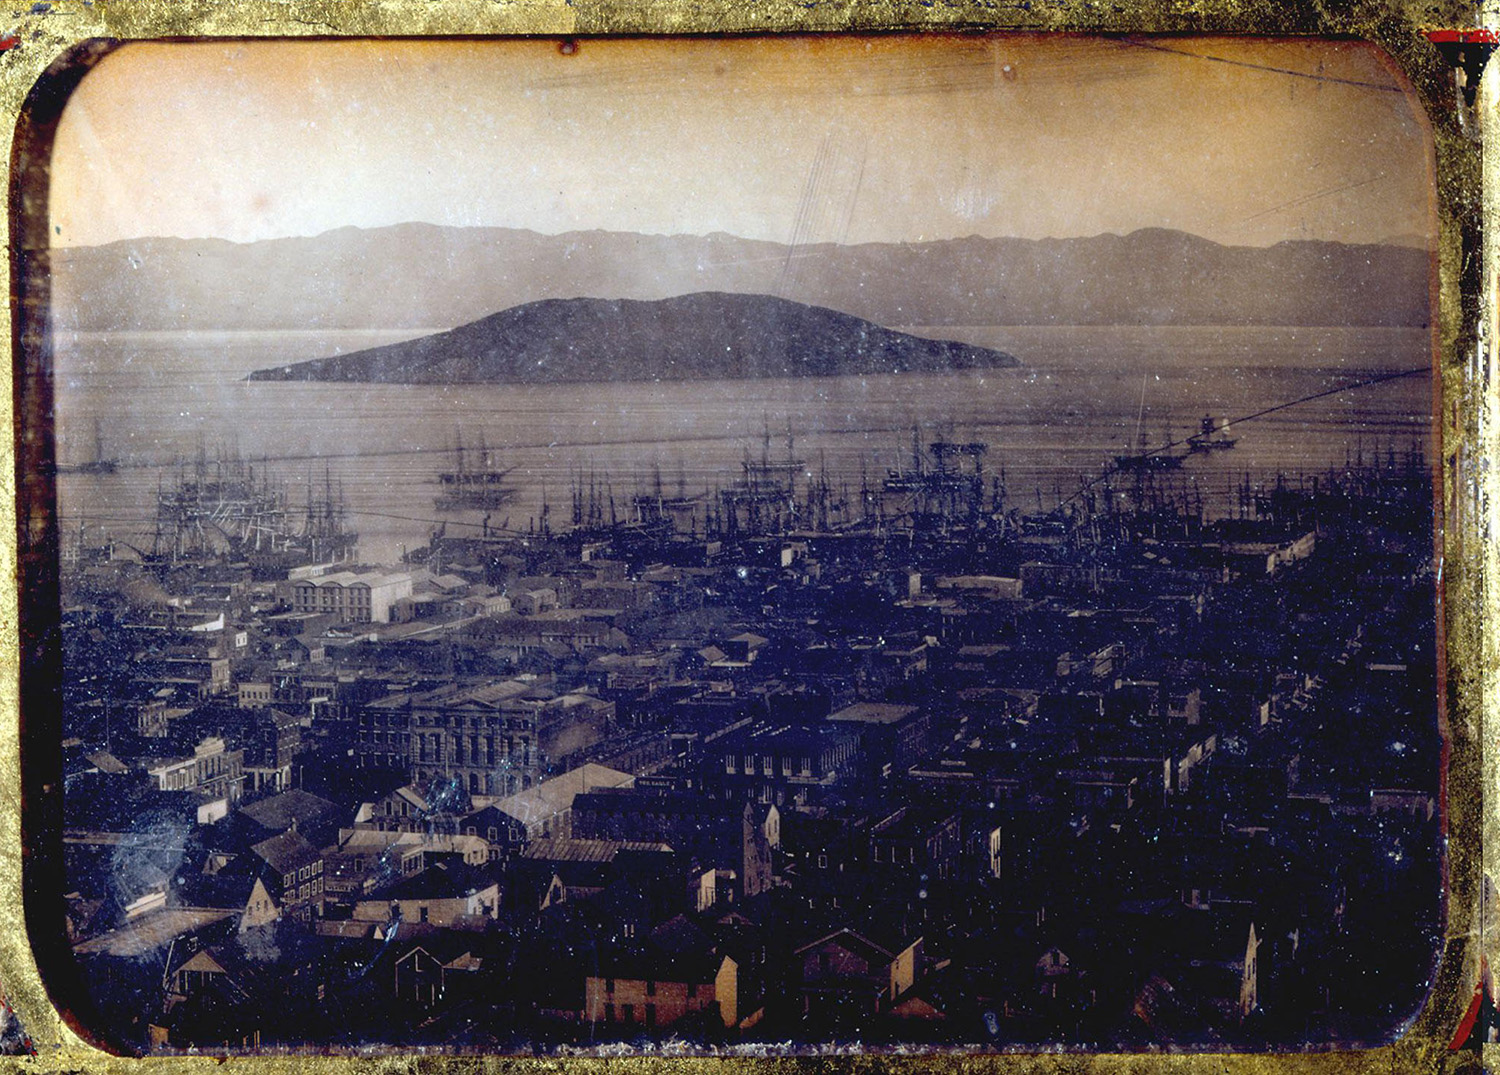 Old photograph of San Francisco in 1853